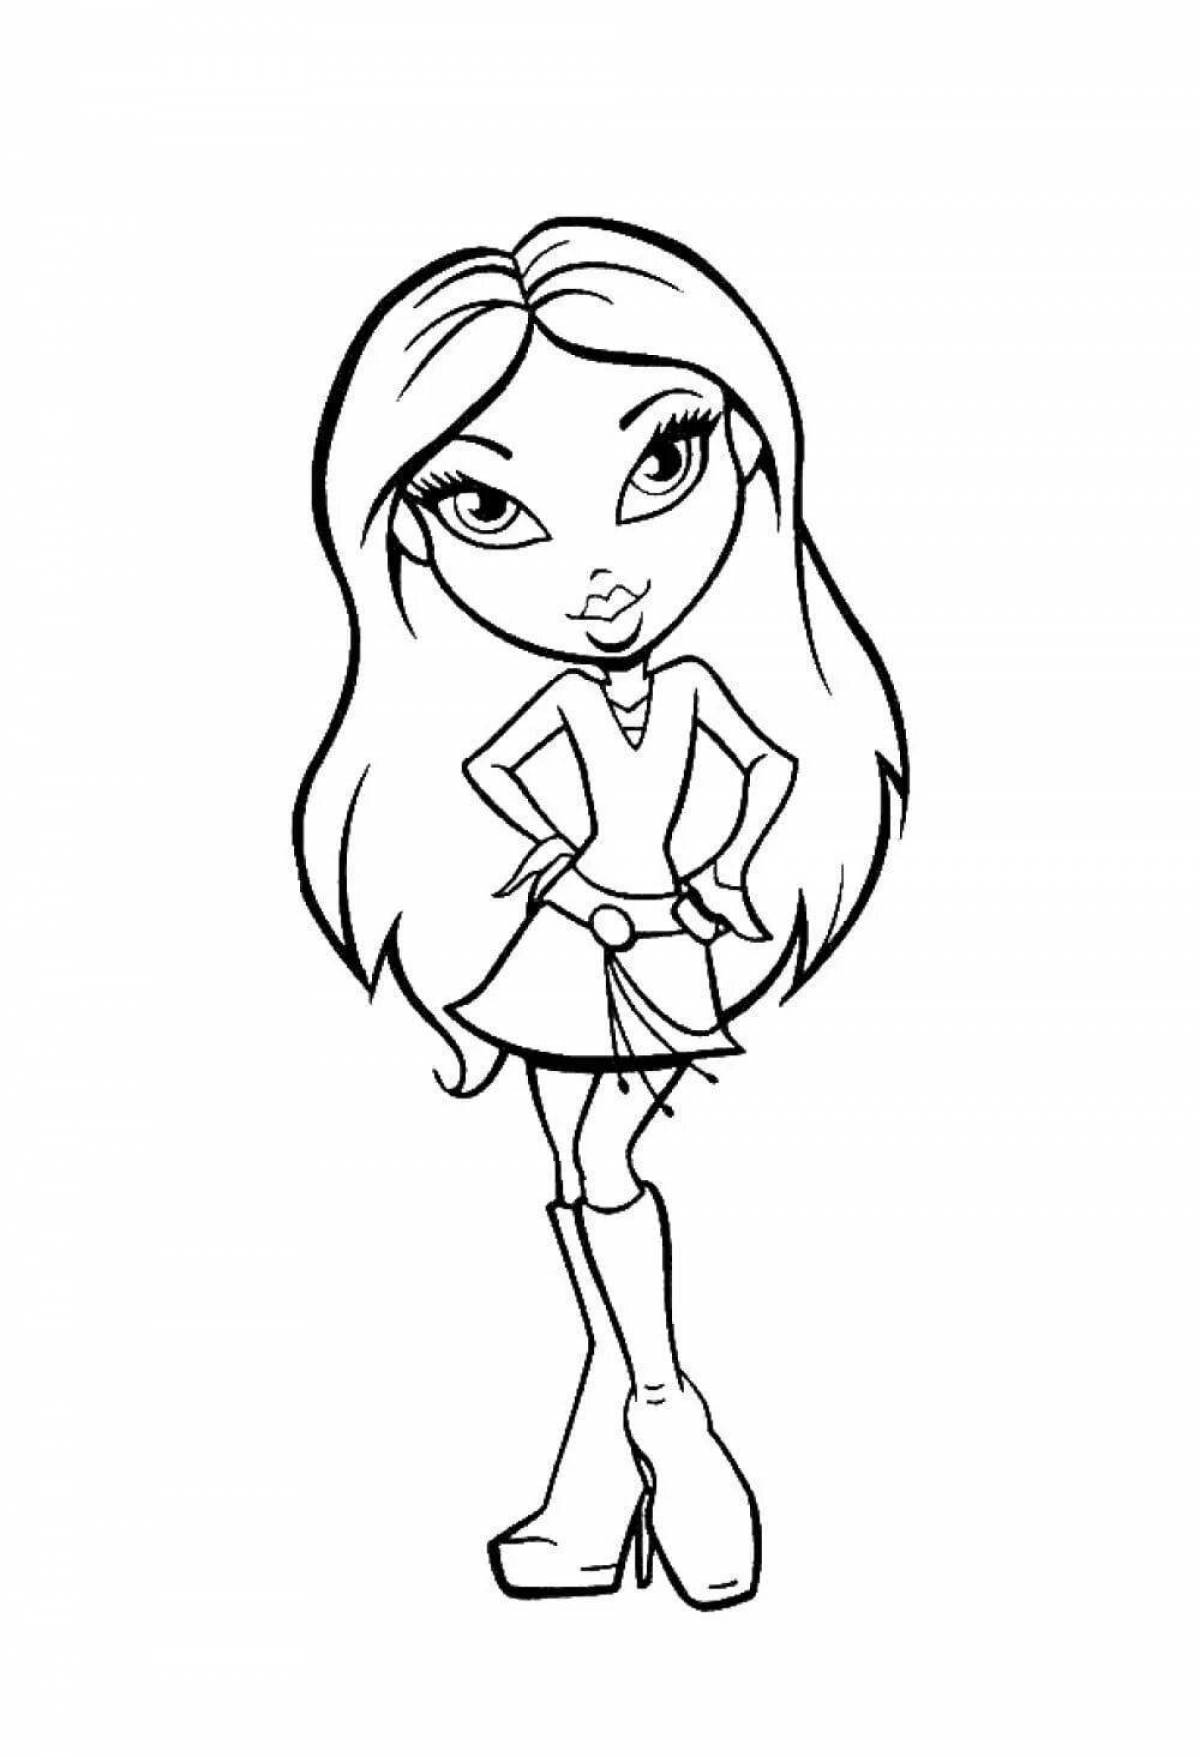 Color-mania pencil coloring page for girls